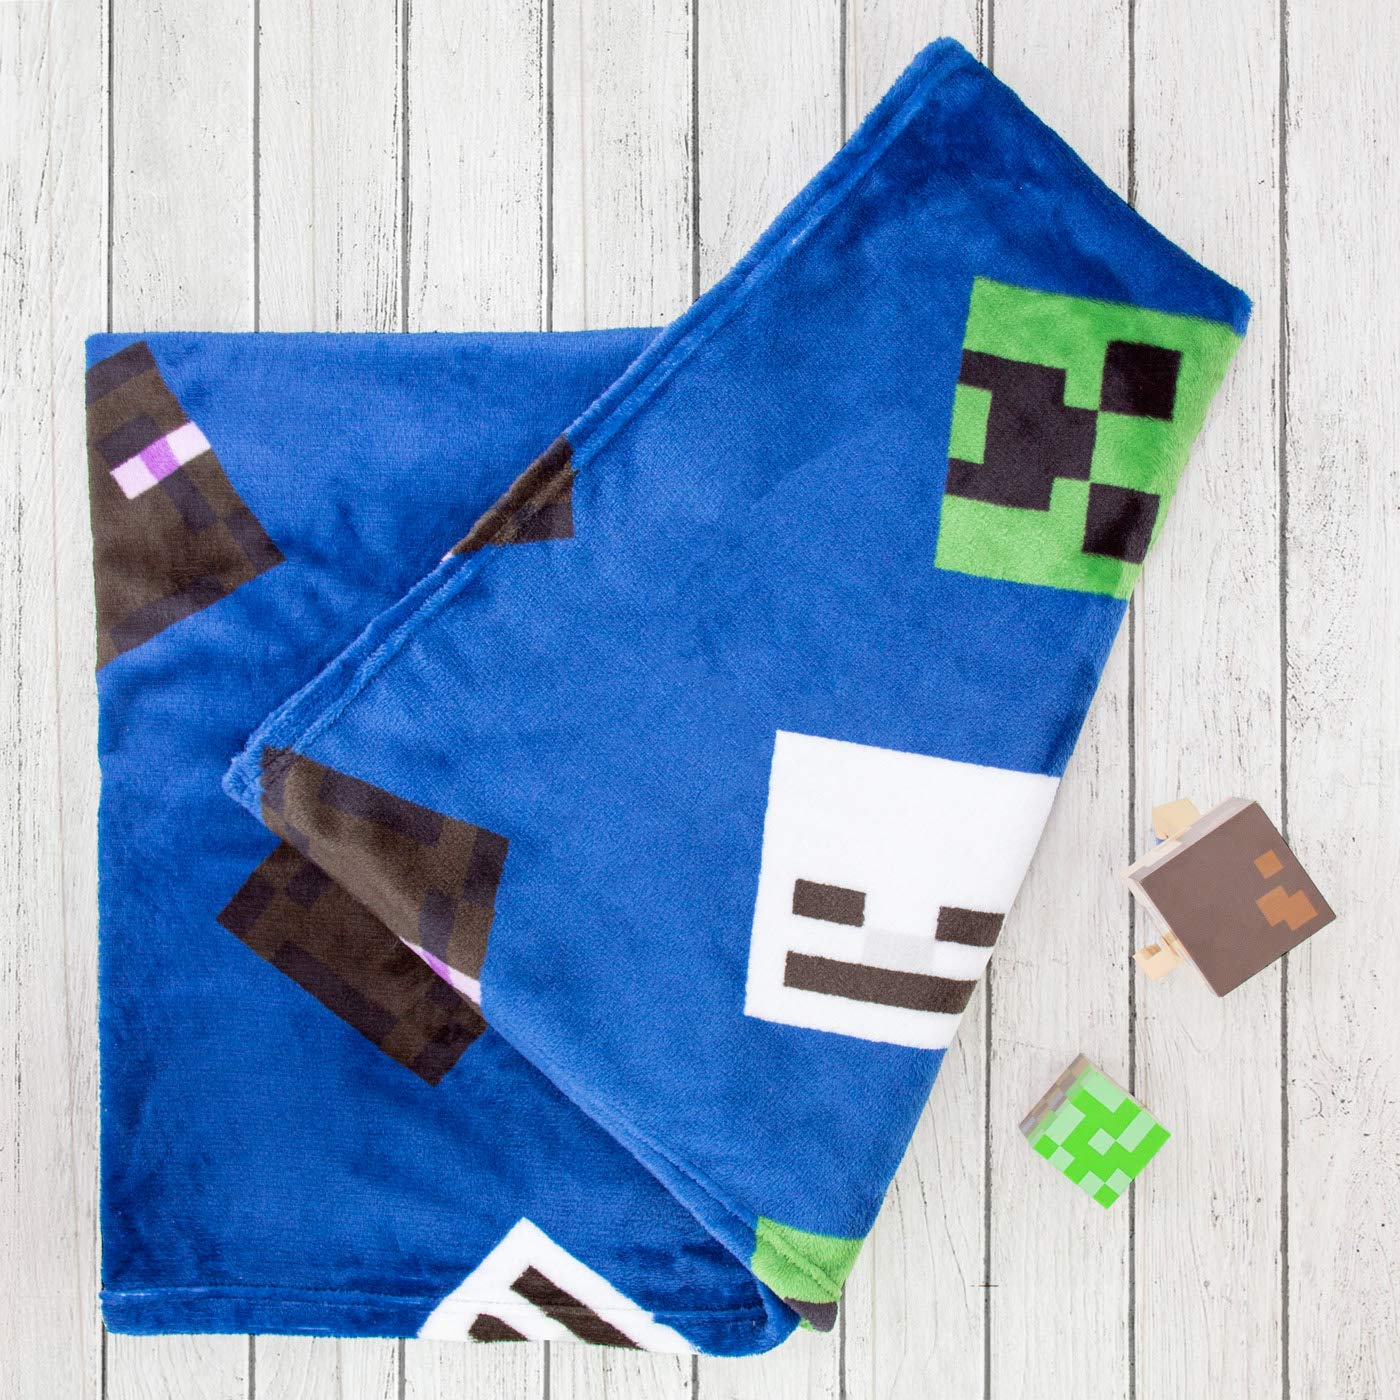 Minecraft Official Creeps Fleece Throw | Creeper Design Super Soft Blanket | Perfect for Any Bedroom, Blue, 1 Count (Pack of 1)